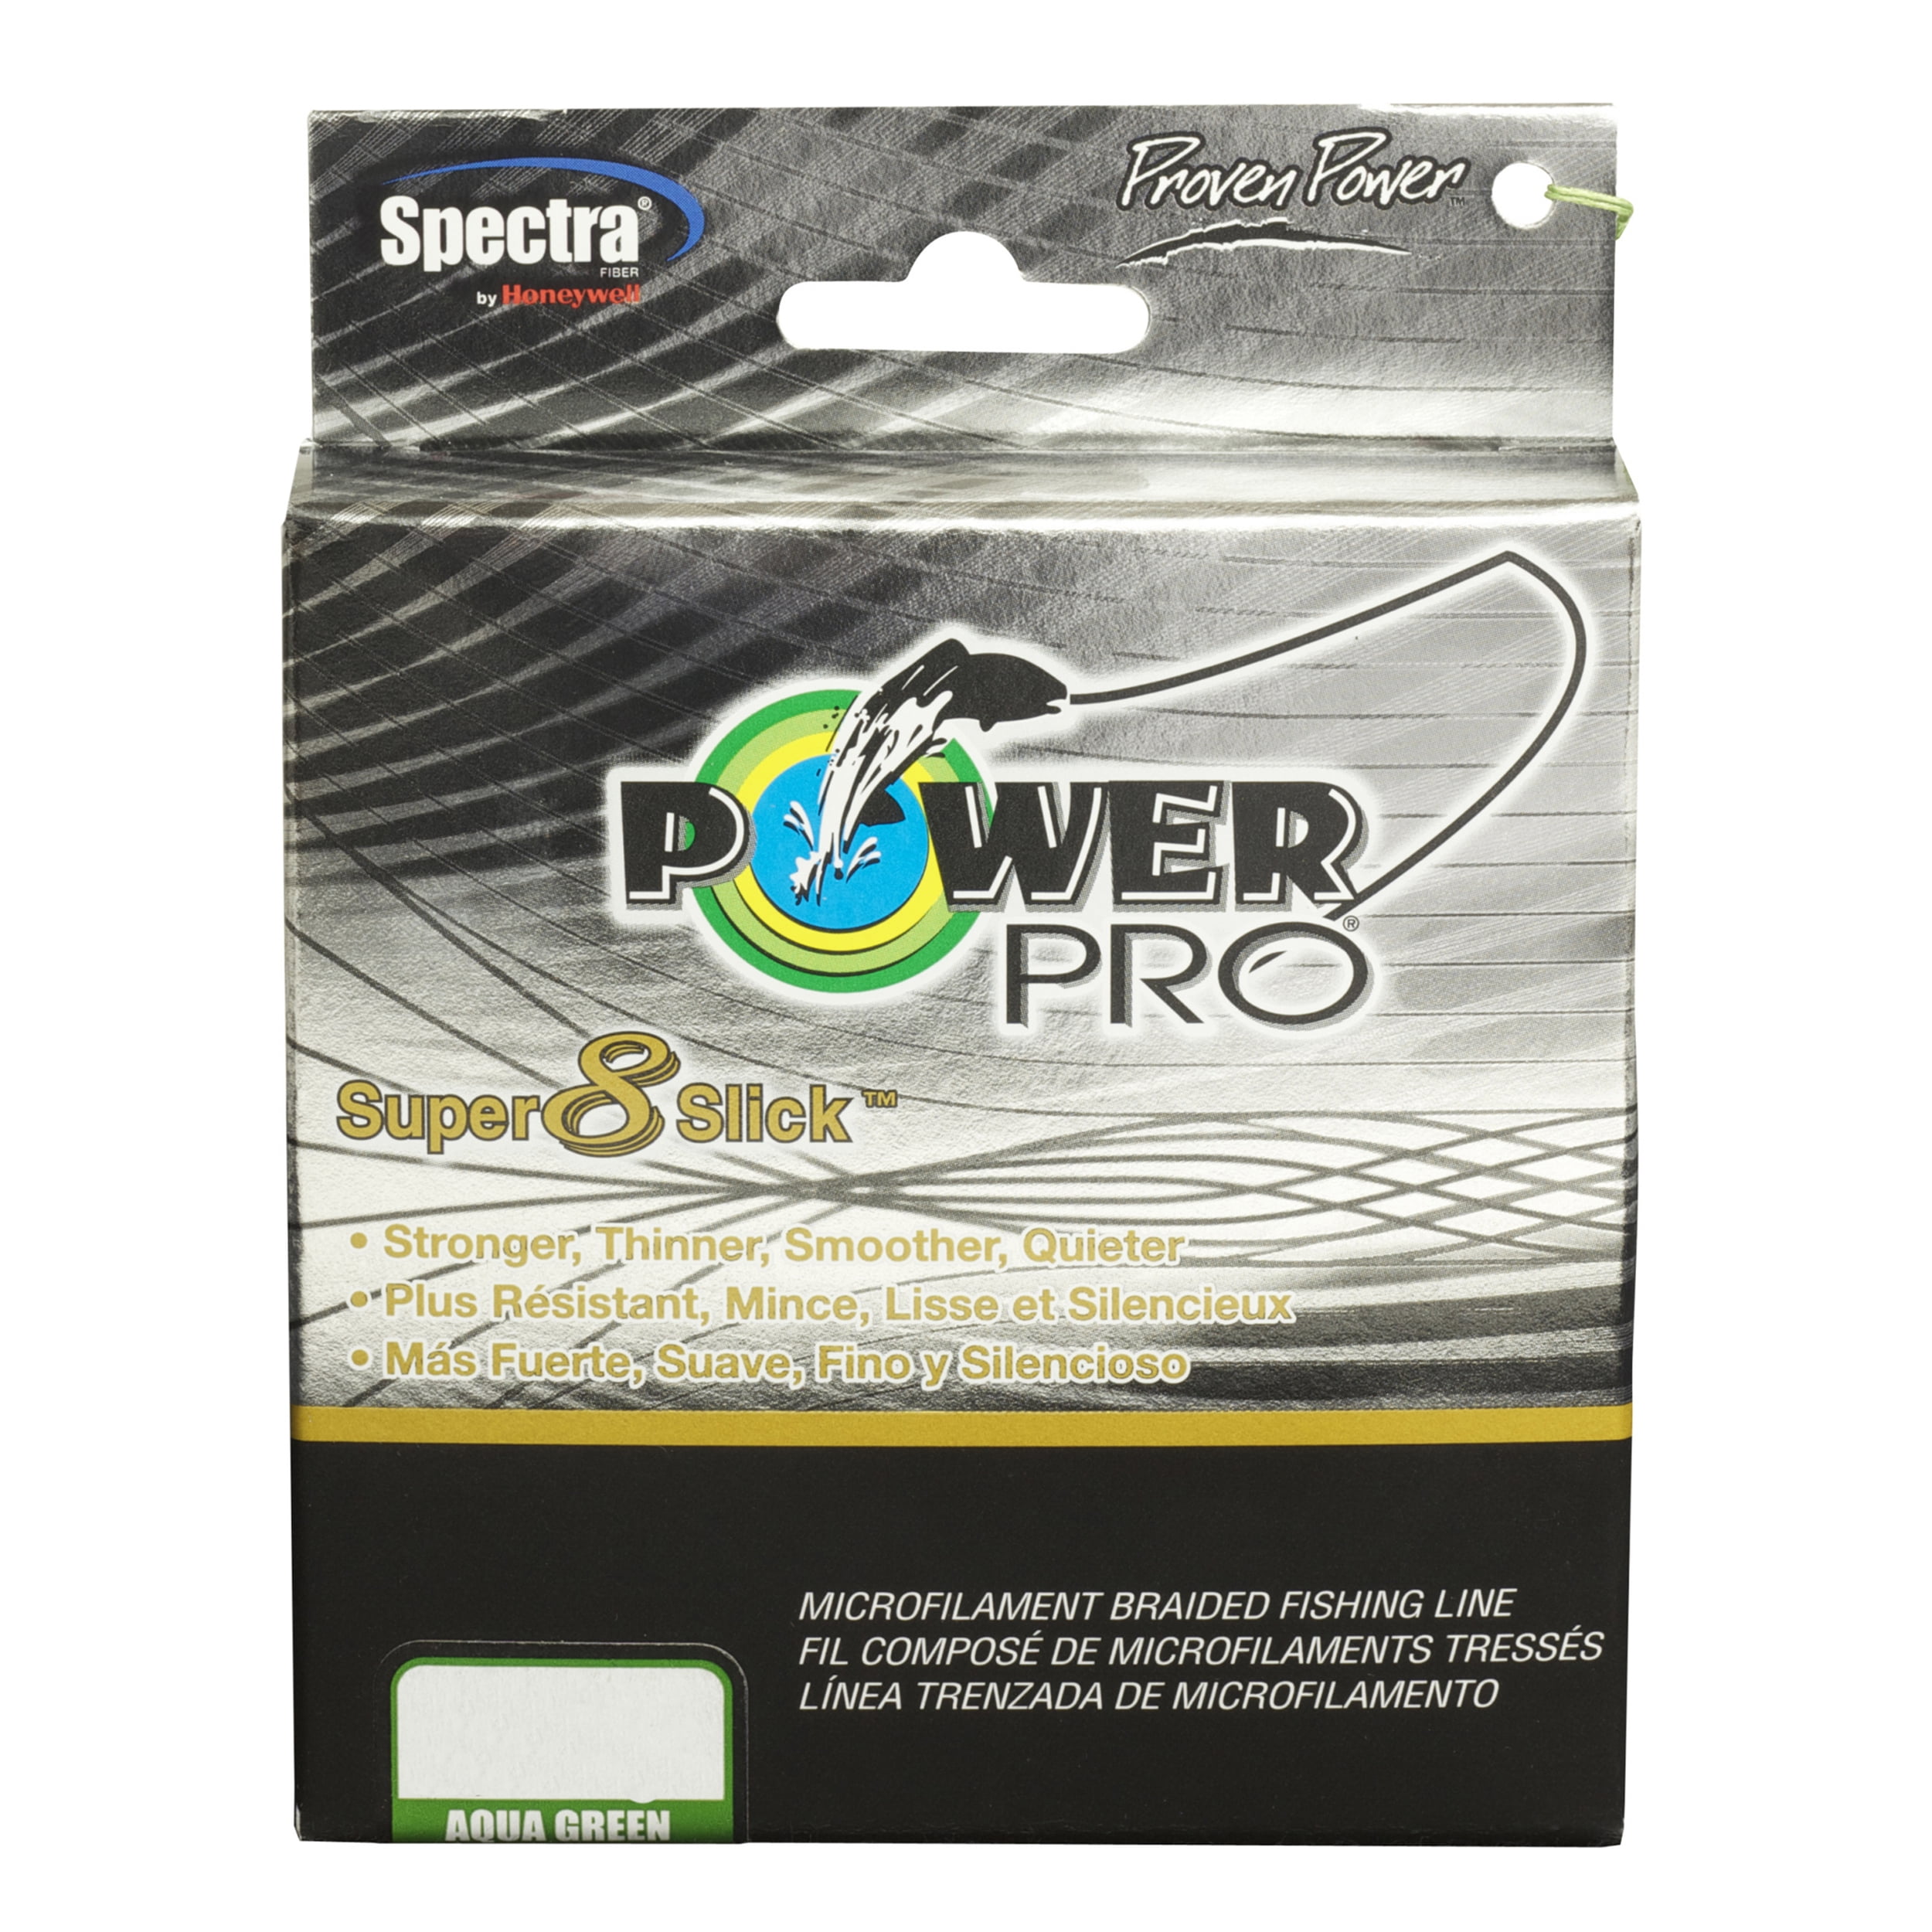 Power Pro Braided Line Yellow - 150 Yards 50LB Test